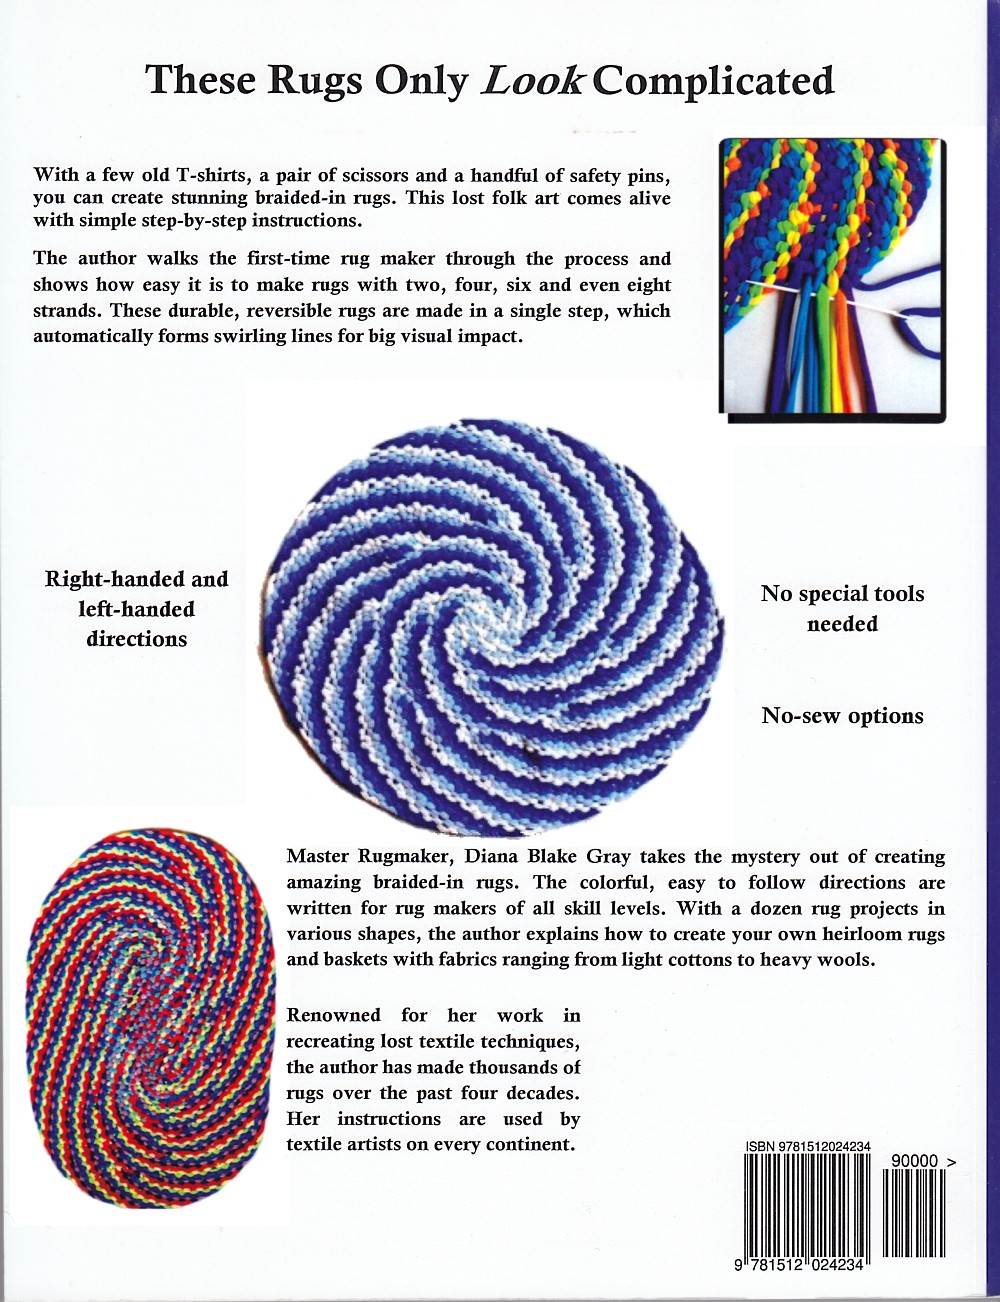 Braided-in book back cover